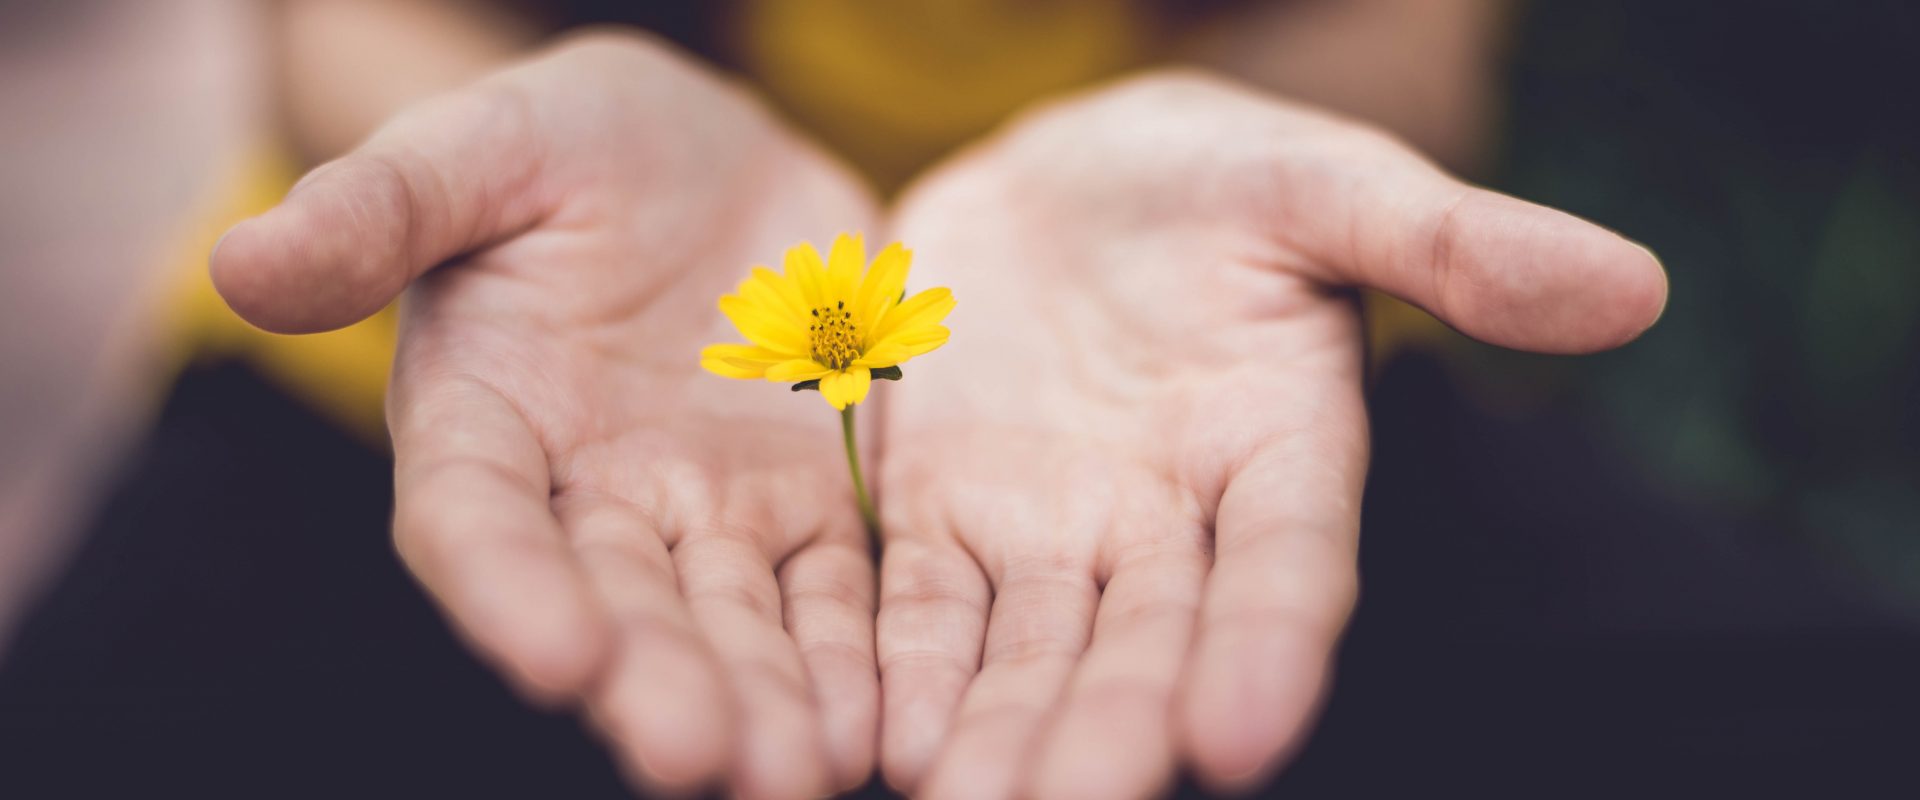 flower in the palm of someones hands